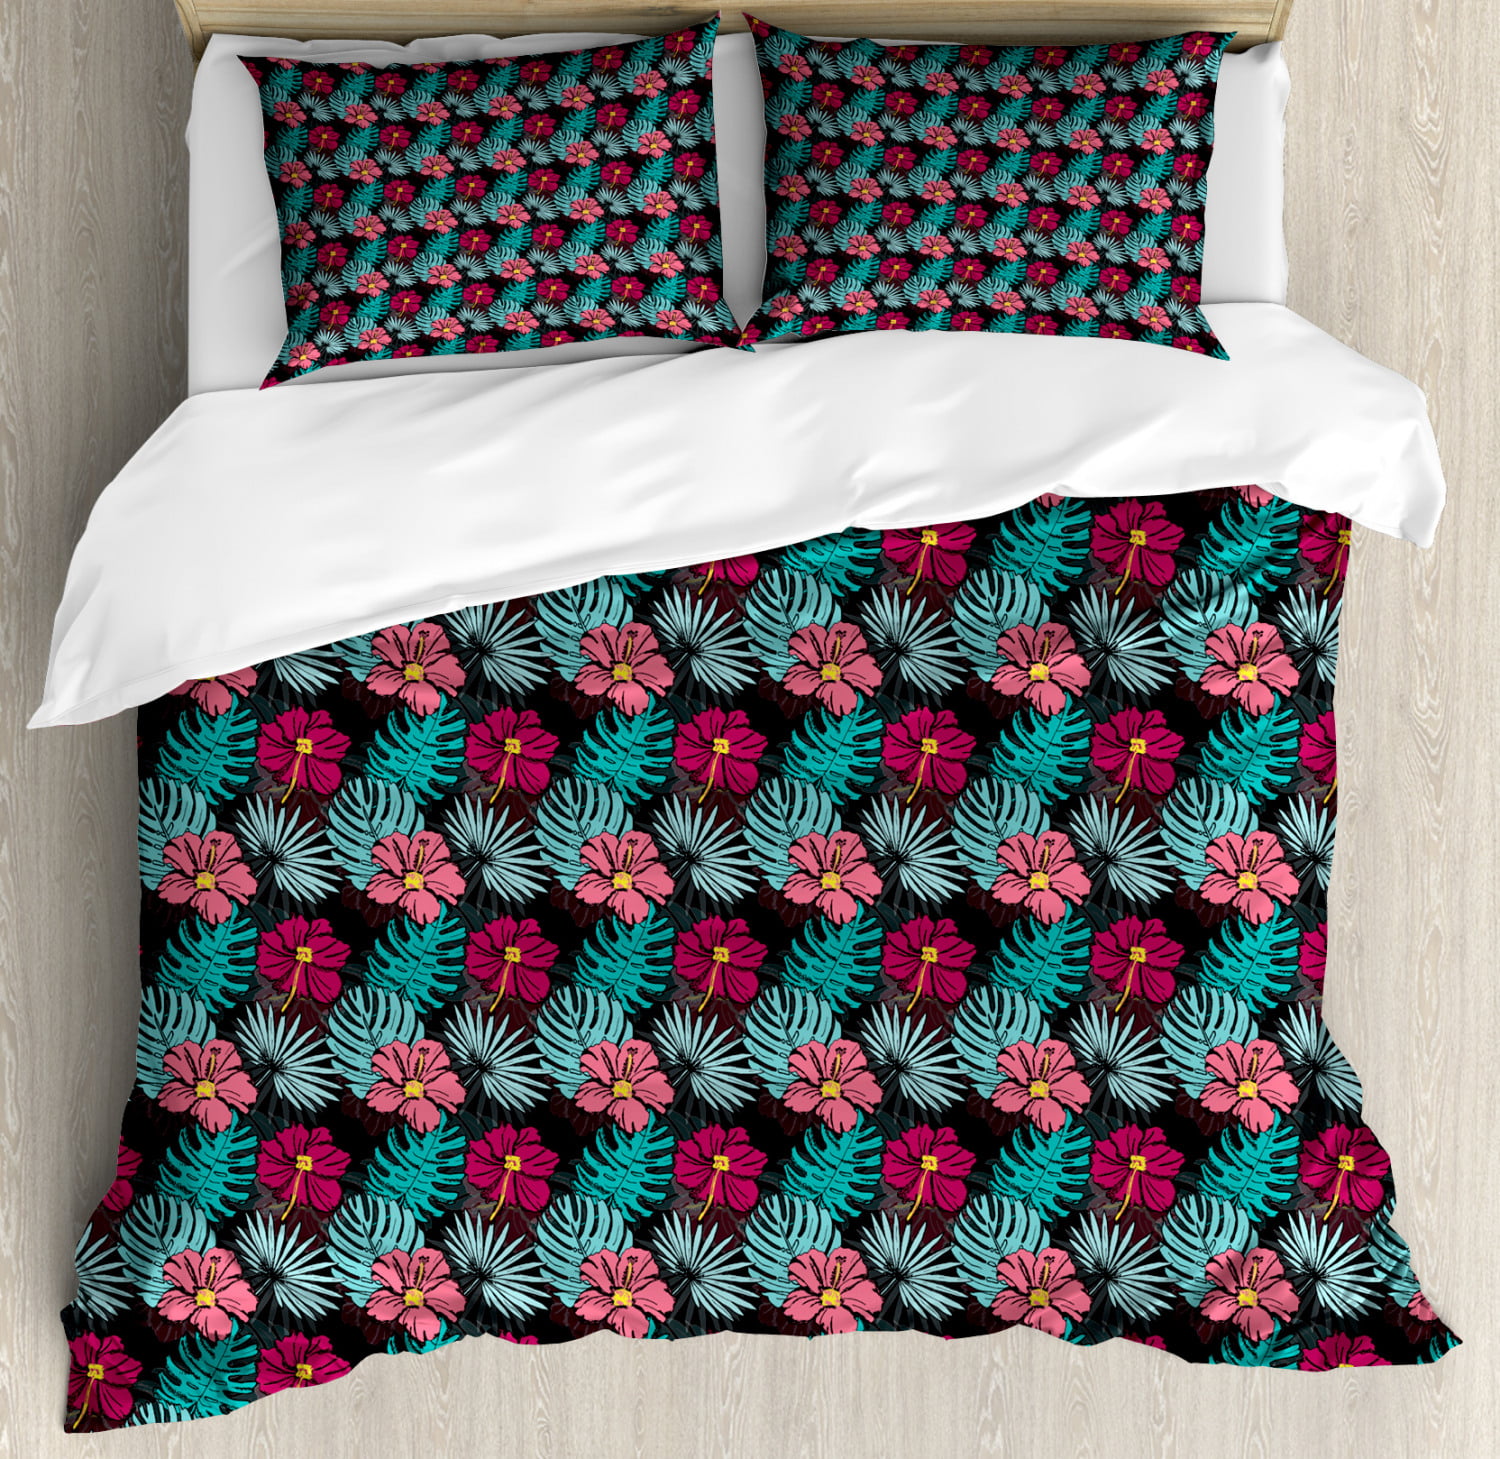 Tropical Duvet Cover Set King Size, Hibiscus and Monstera Leaves ...